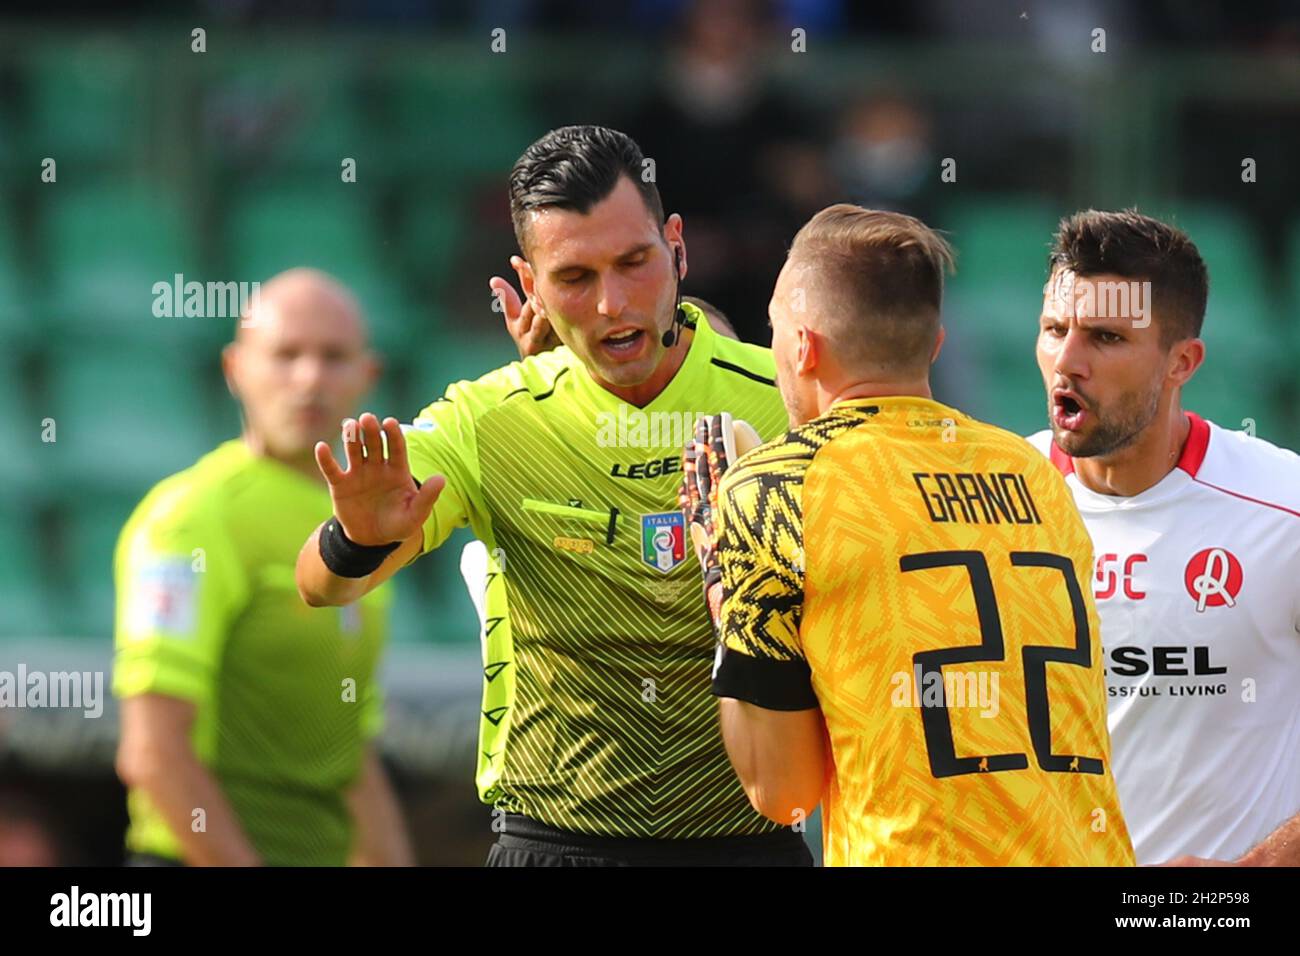 Terni, Italy. 23rd Oct, 2021. goalkeeper Grandi Matteo (Vicenza) discusses with referee Volpi Manuel during Ternana Calcio vs LR Vicenza, Italian Football Championship League BKT in Terni, Italy, October 23 2021 Credit: Independent Photo Agency/Alamy Live News Stock Photo